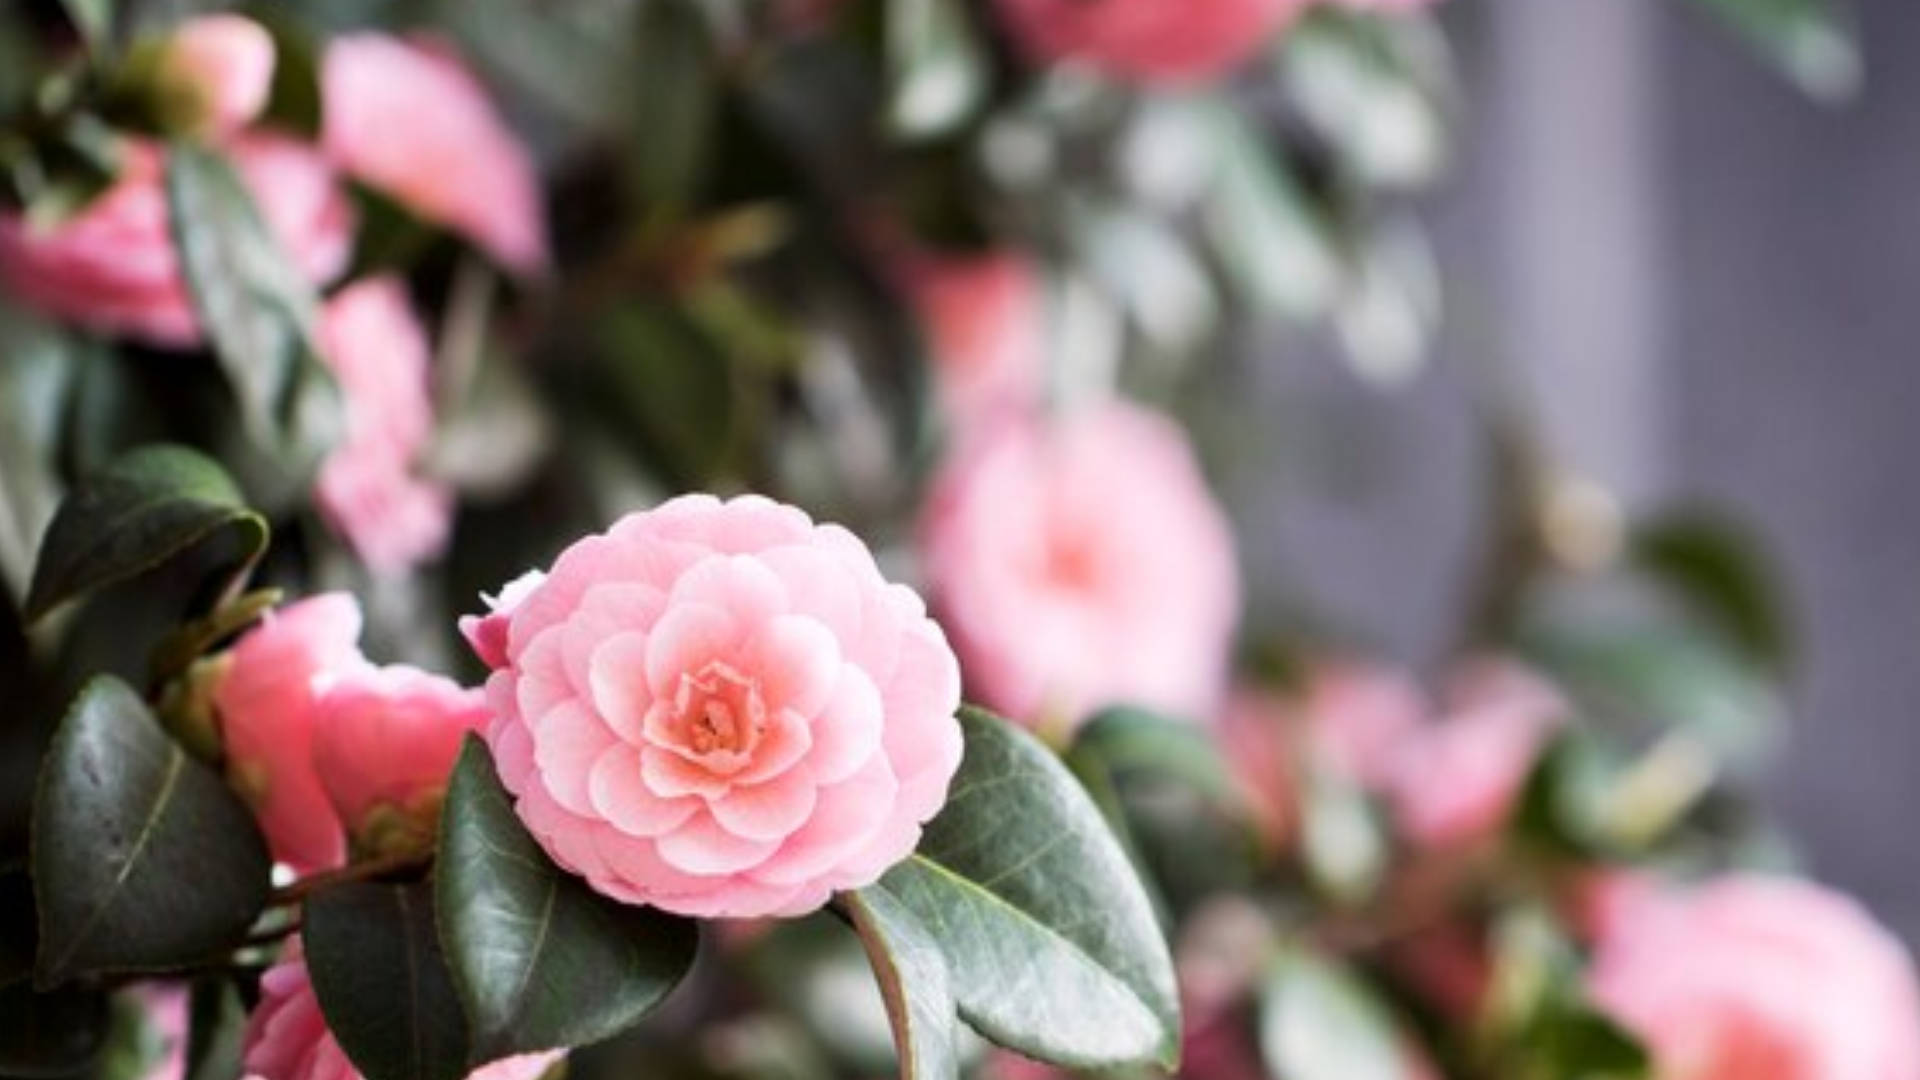 Blooming Camellia Sasanqua Flowers Background